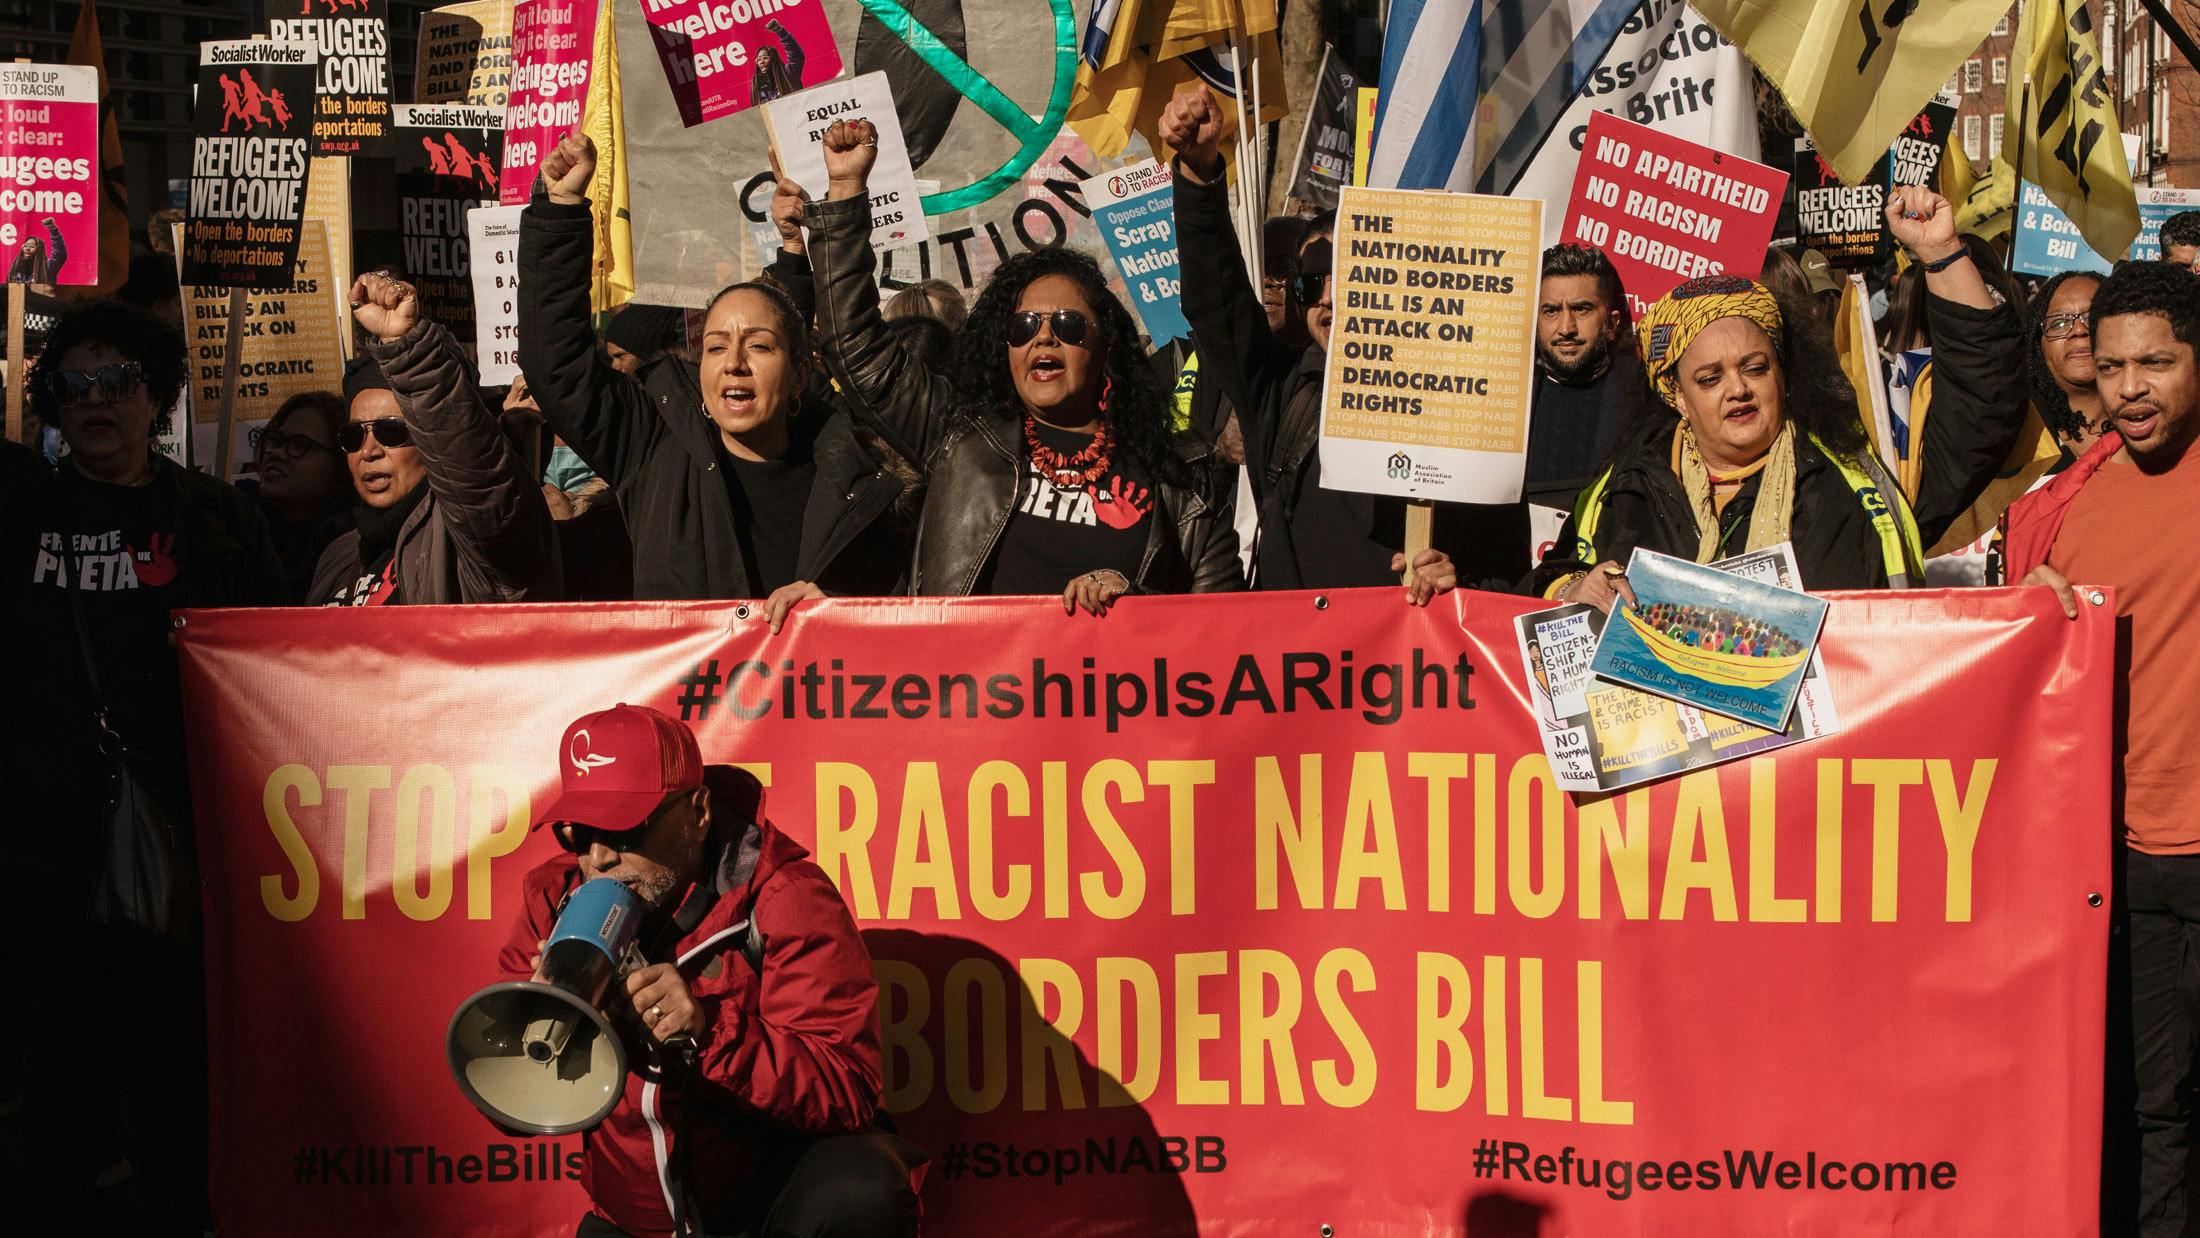 “Immigrants are the foundation of this country, we’re here for them”: Inside the Nationality and Borders Bill protest